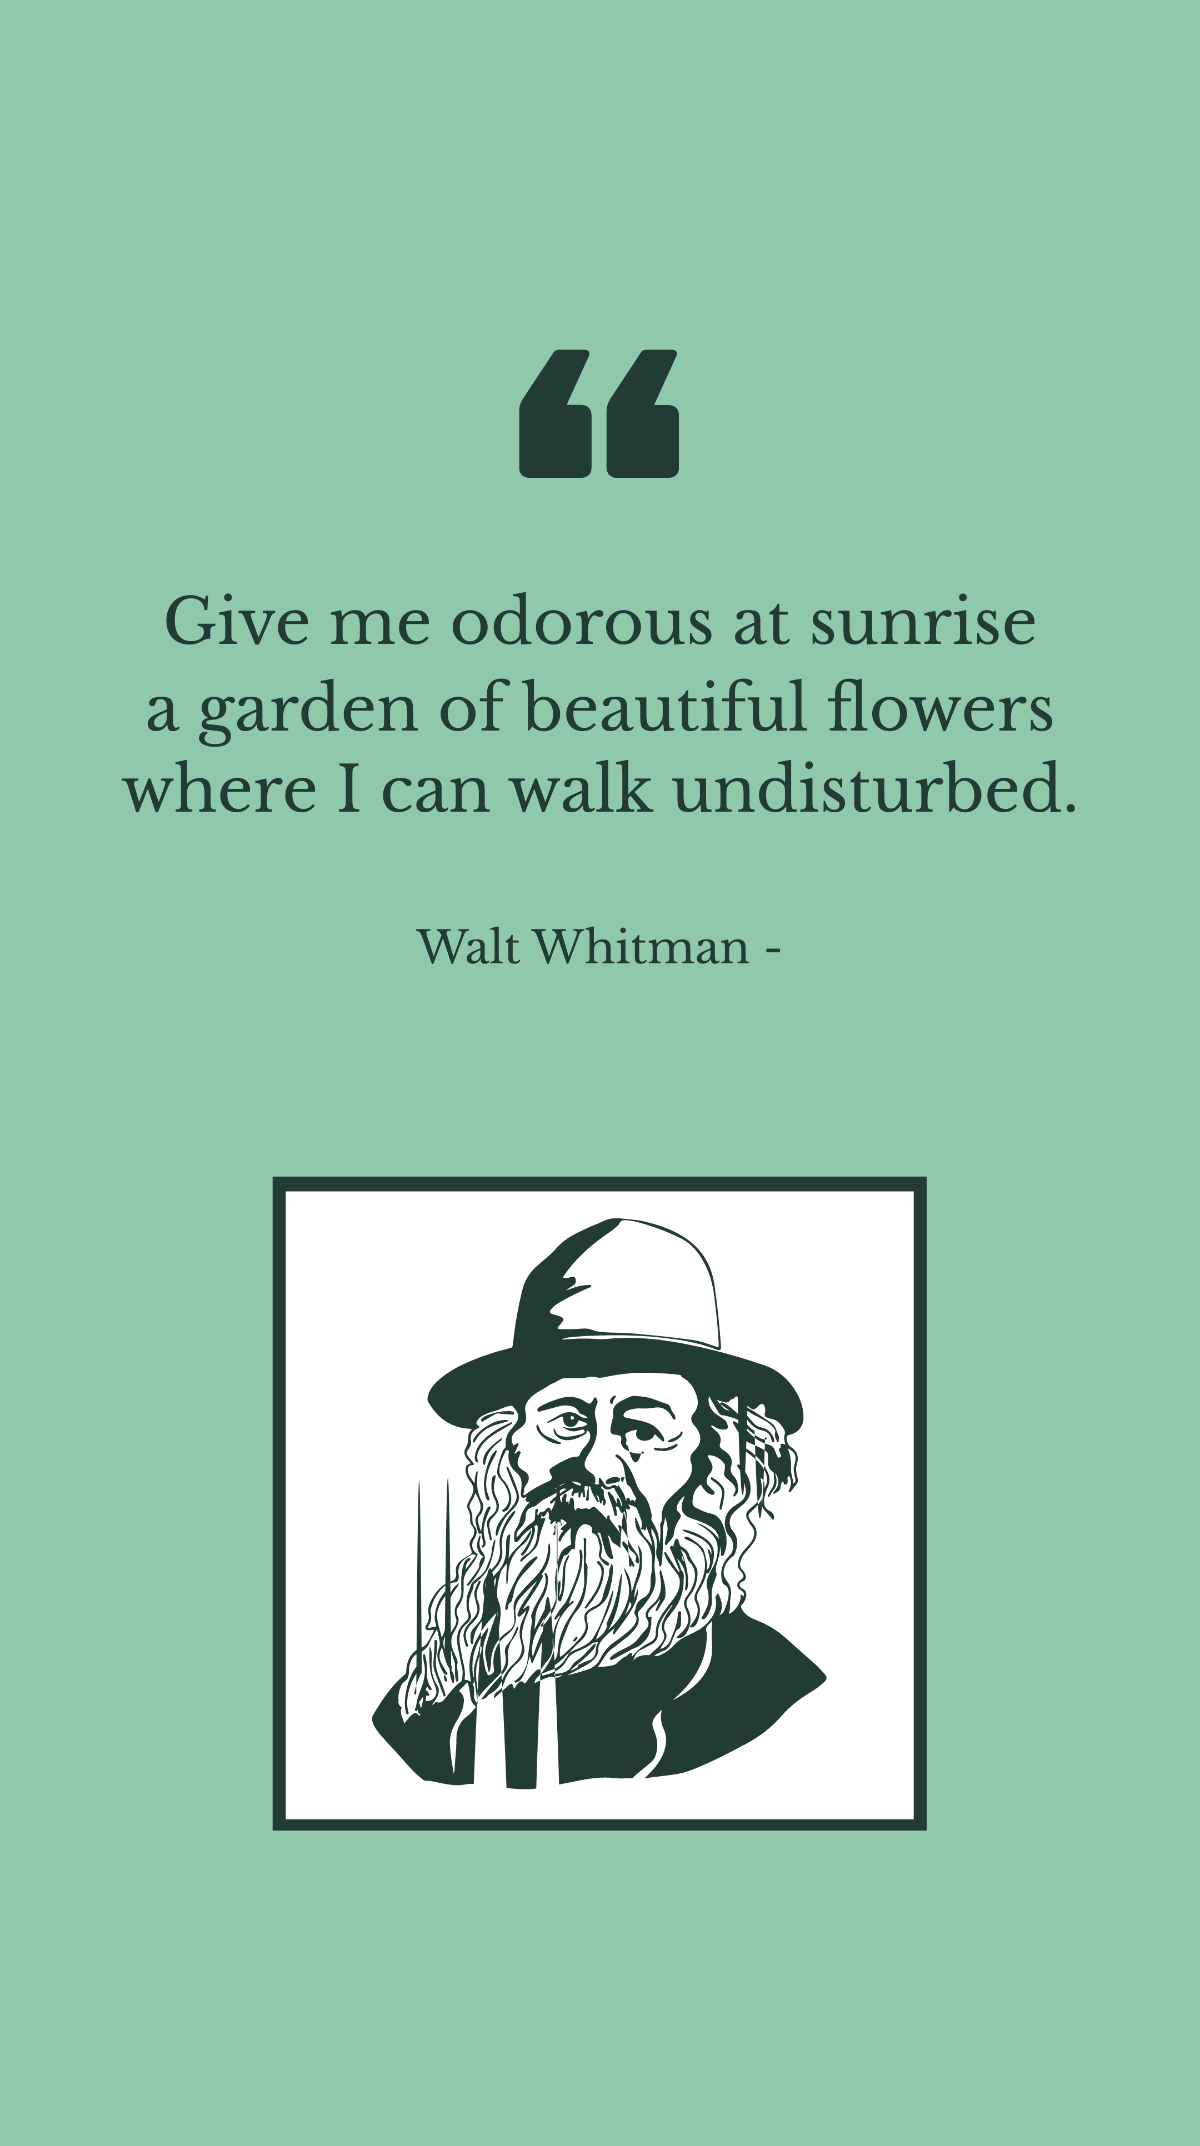 Walt Whitman - Give me odorous at sunrise a garden of beautiful flowers where I can walk undisturbed. Template